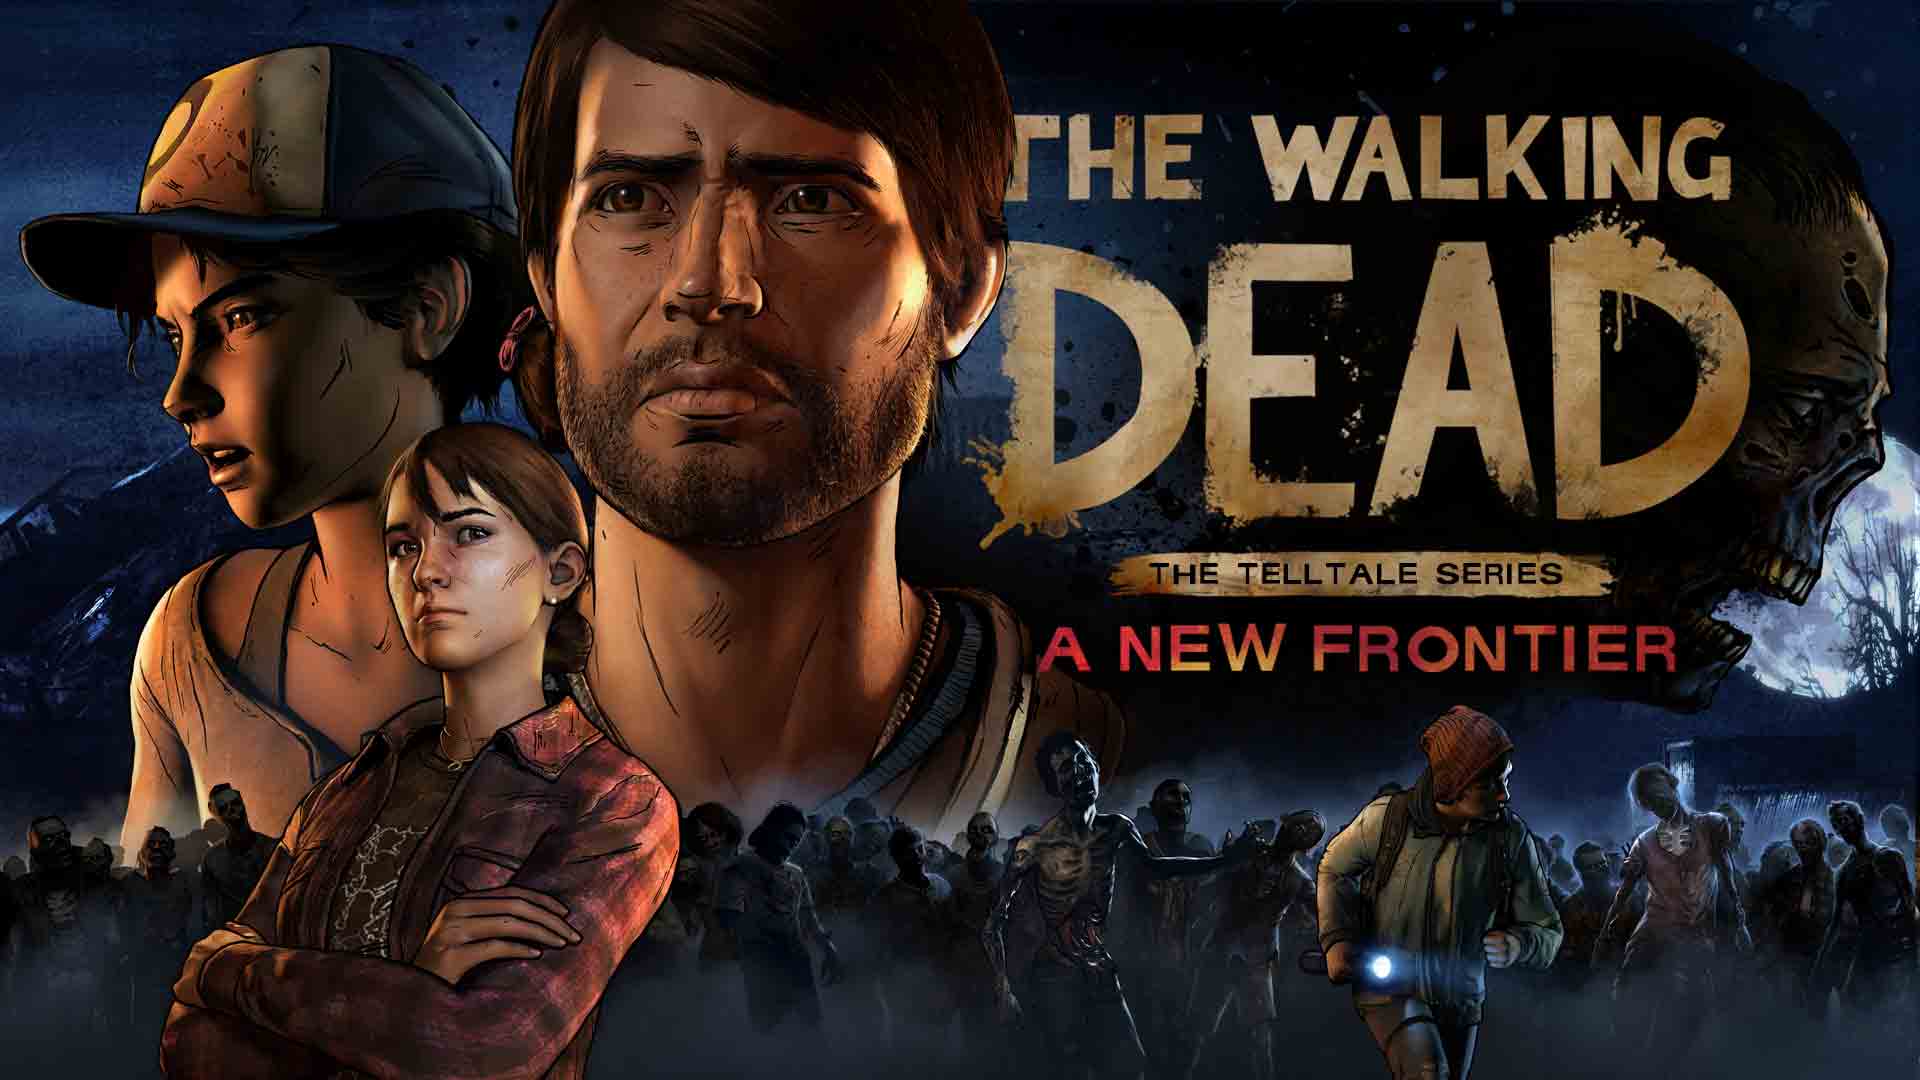 The Walking Dead A New Frontier Episode 1-2 Free Download